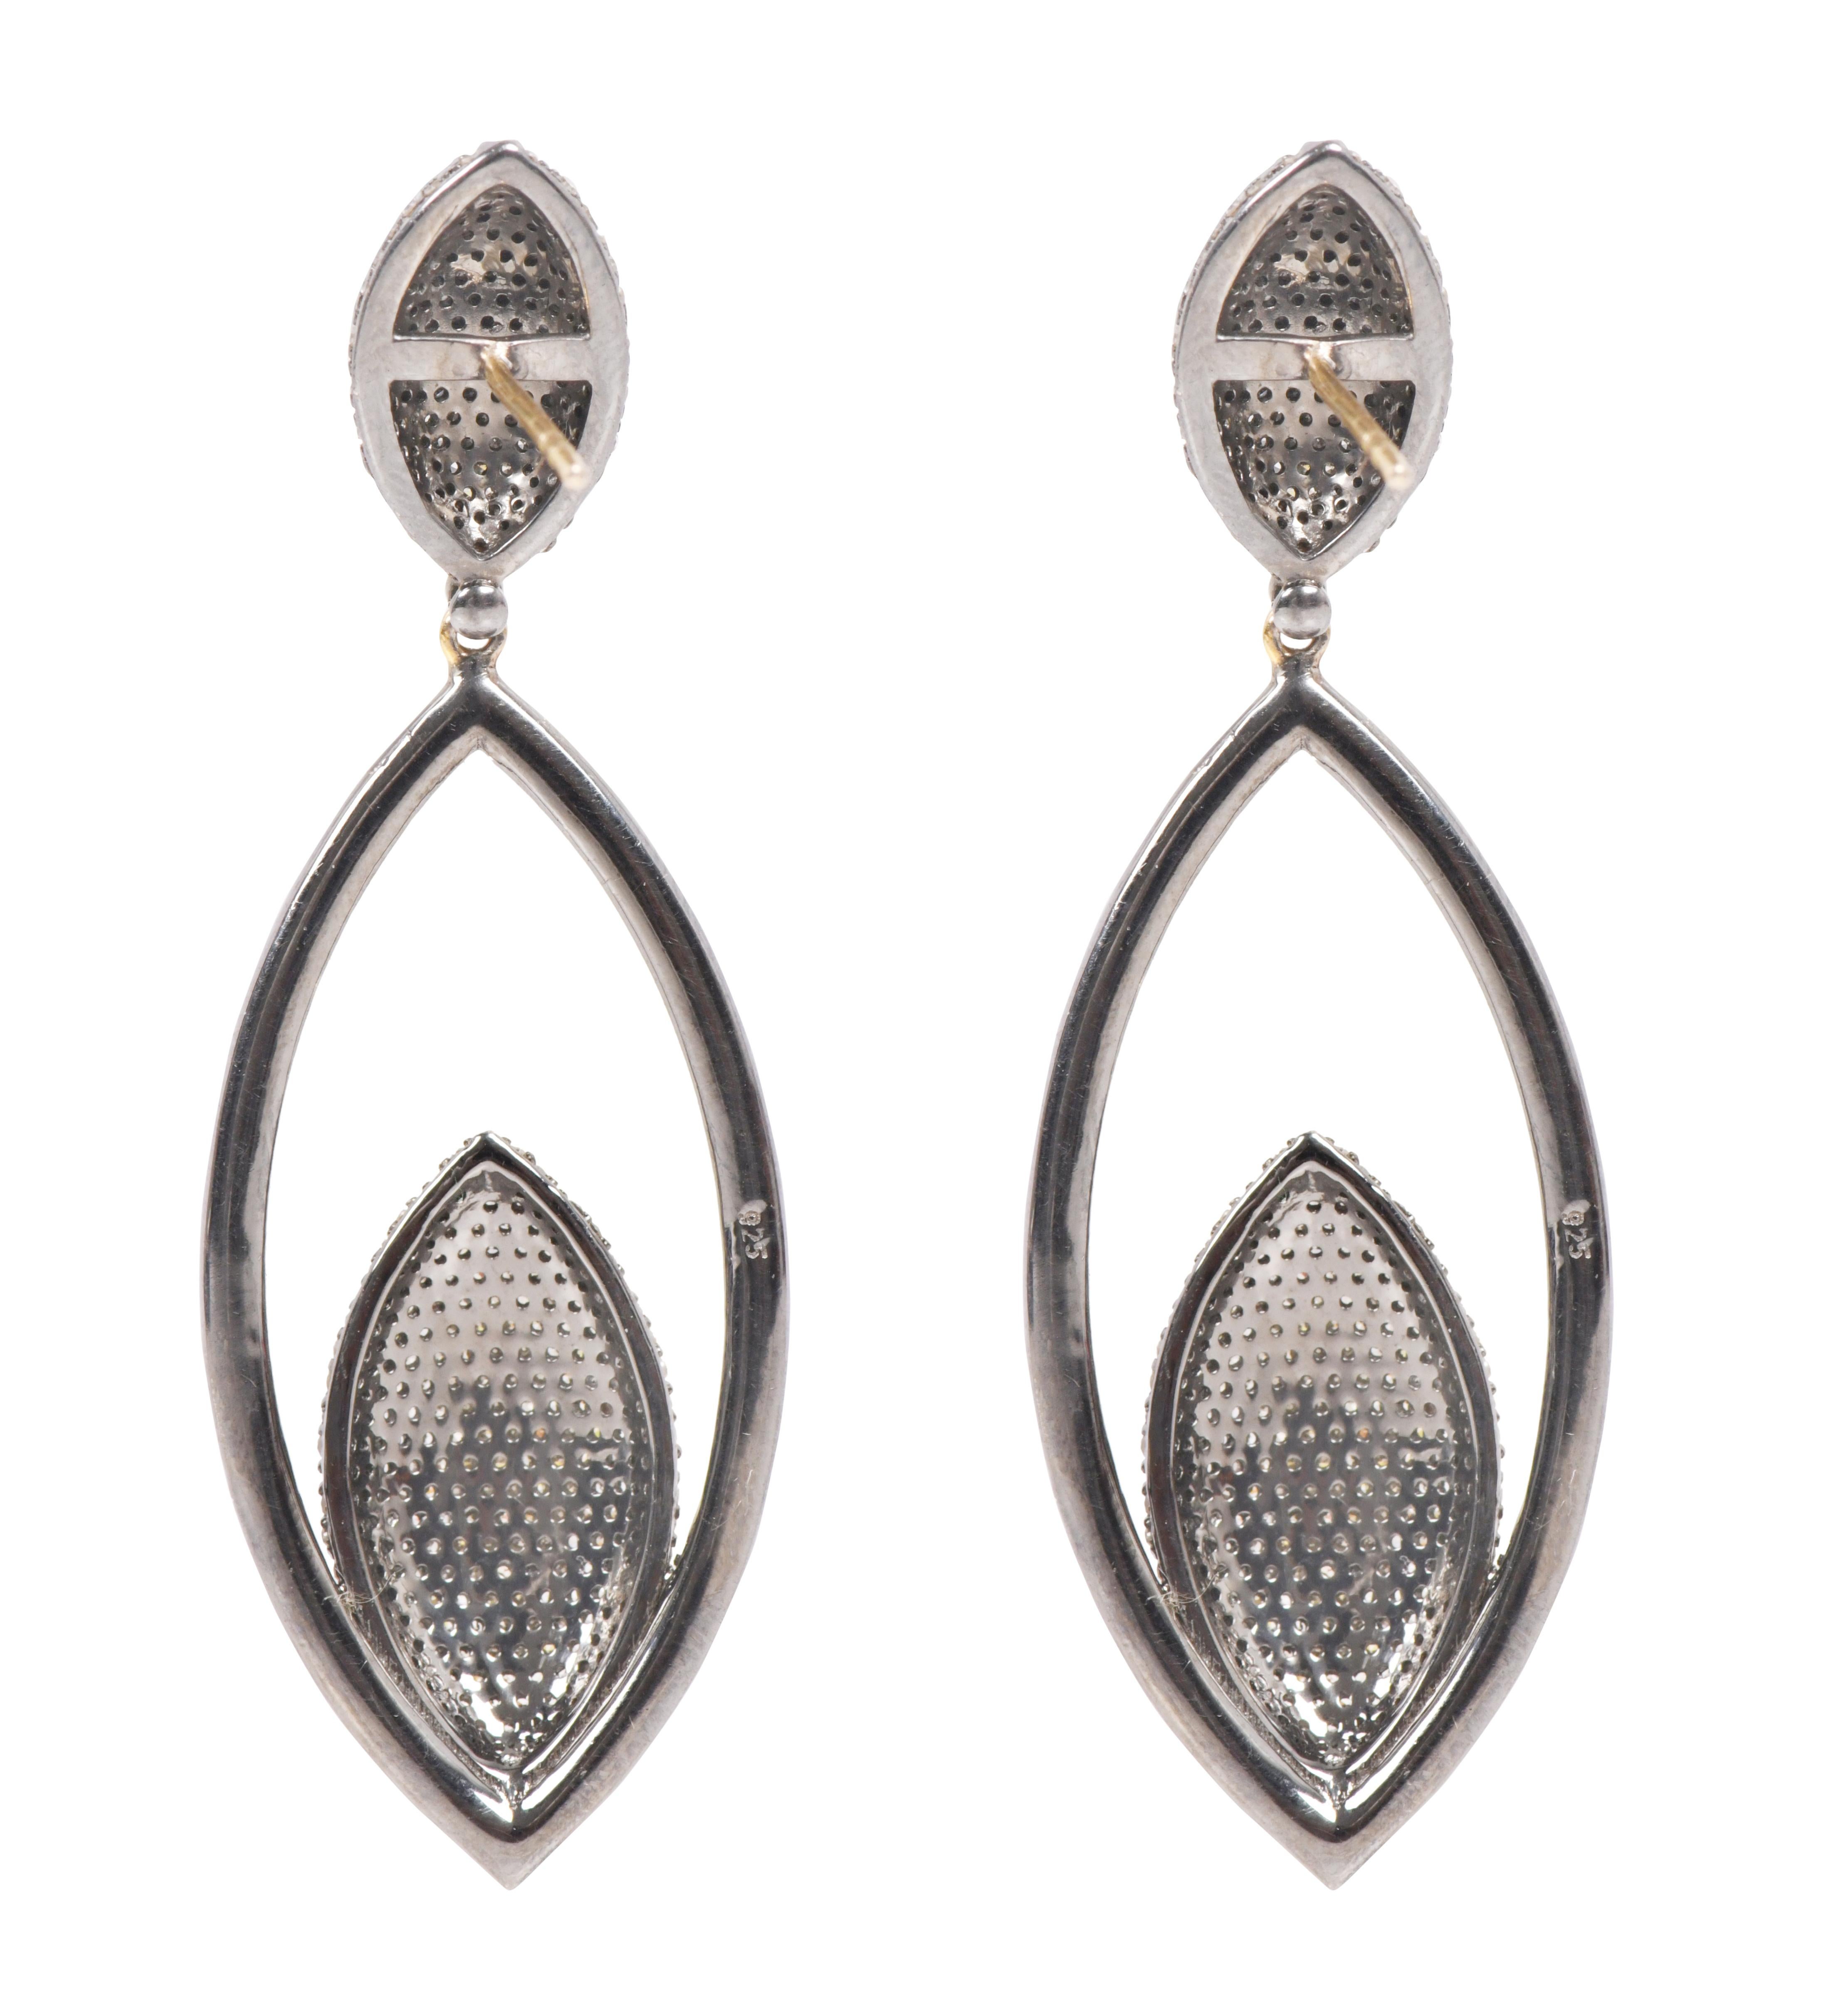 4.81 Carat Pave Diamond Cocktail Drop Earrings in Victorian Style For Sale 2